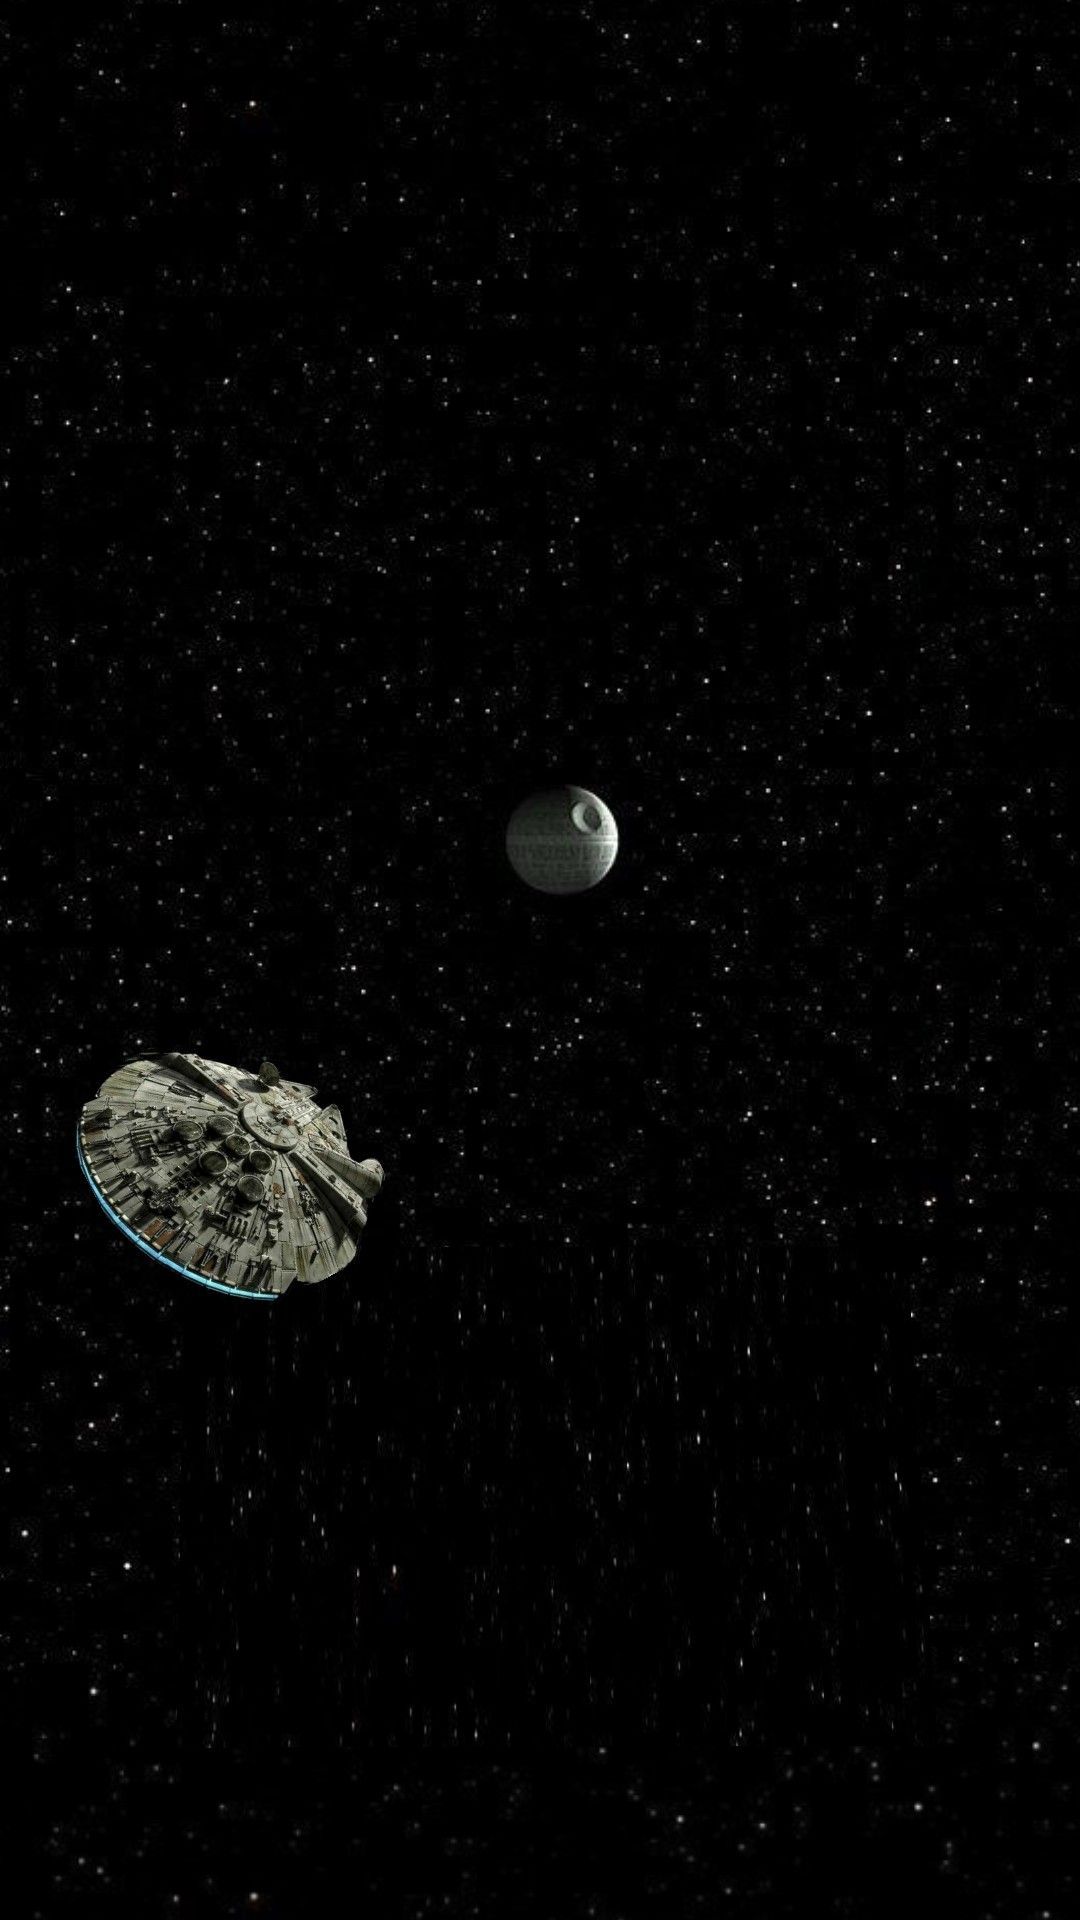 That S No Moon It A Space Station Starwarswallpaper